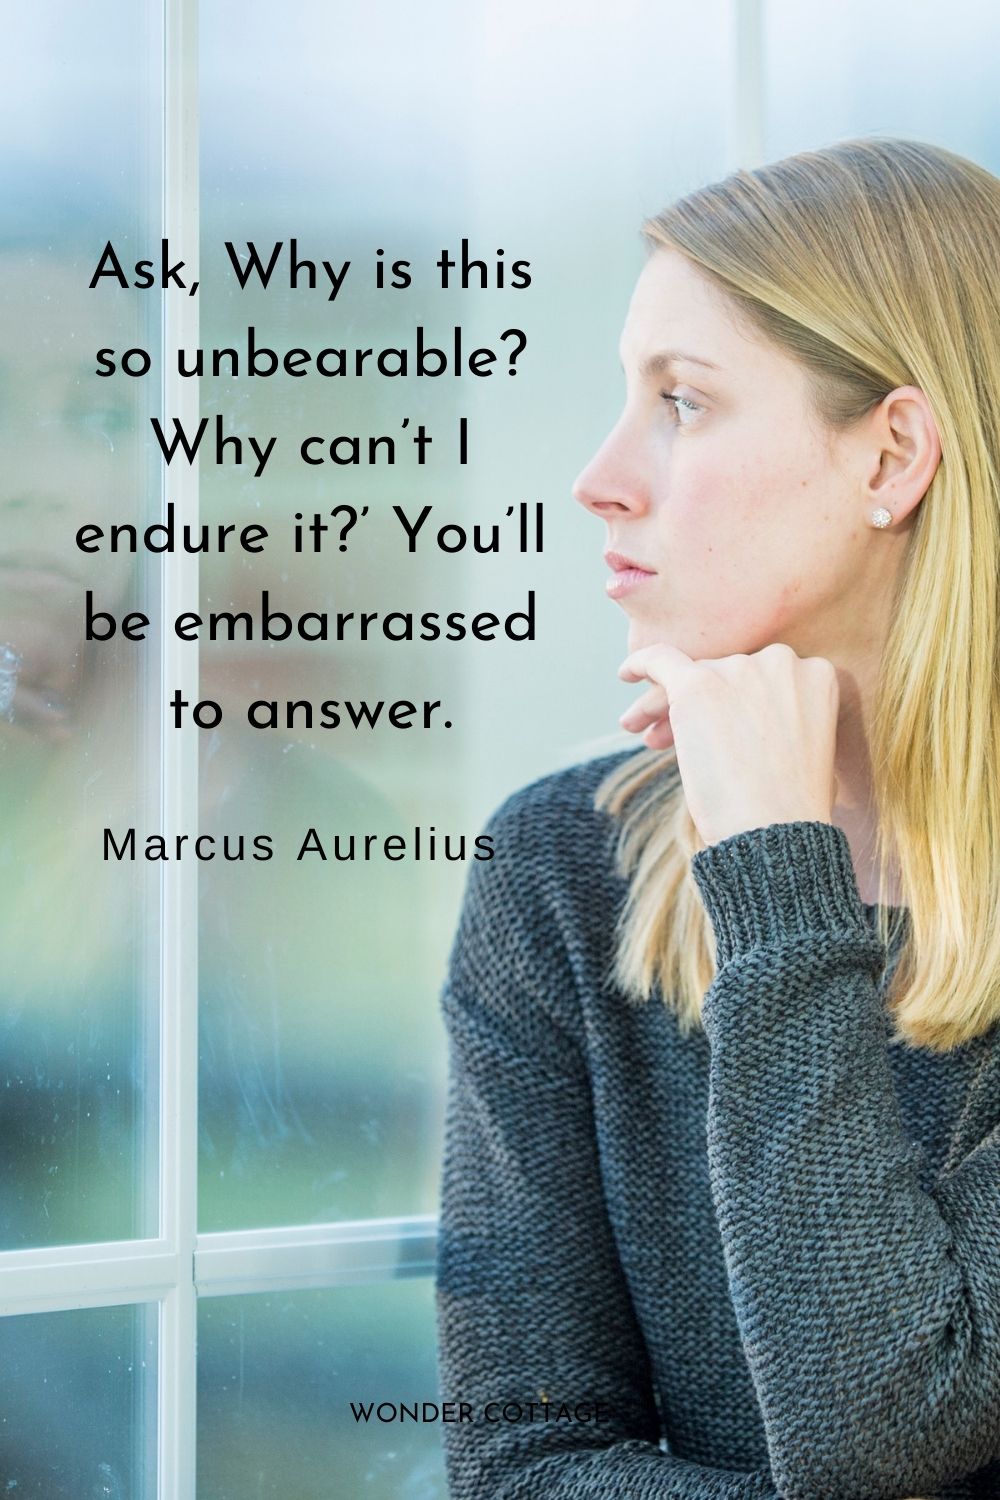 Ask, Why is this so unbearable? Why can’t I endure it?’ You’ll be embarrassed to answer. Marcus Aurelius